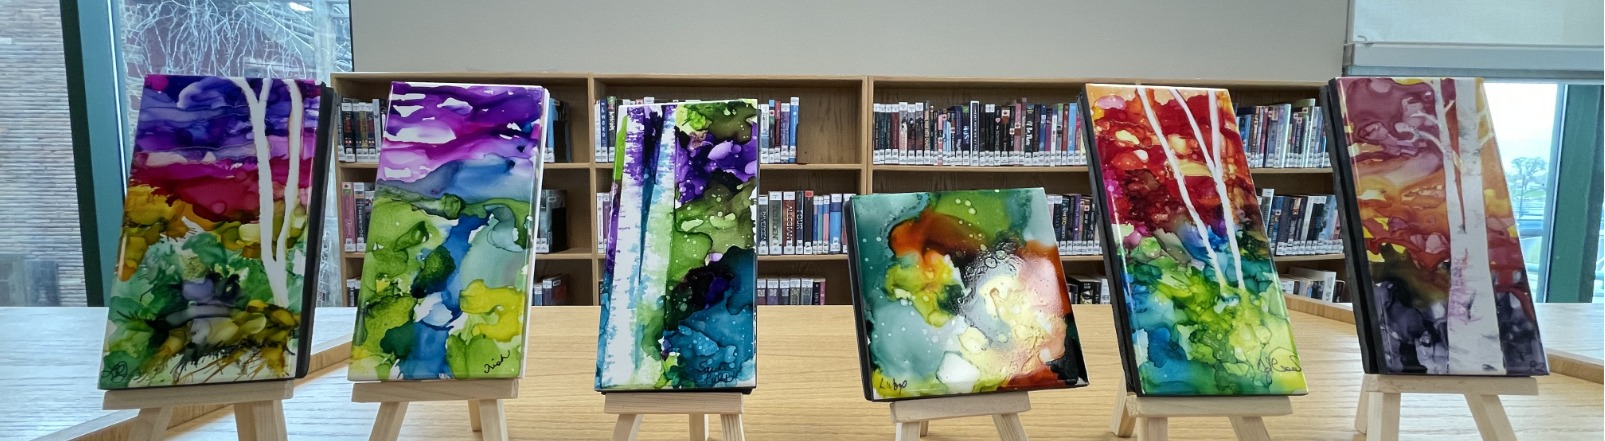 Glass tiles painted with ink and alcohol on display on mini easels